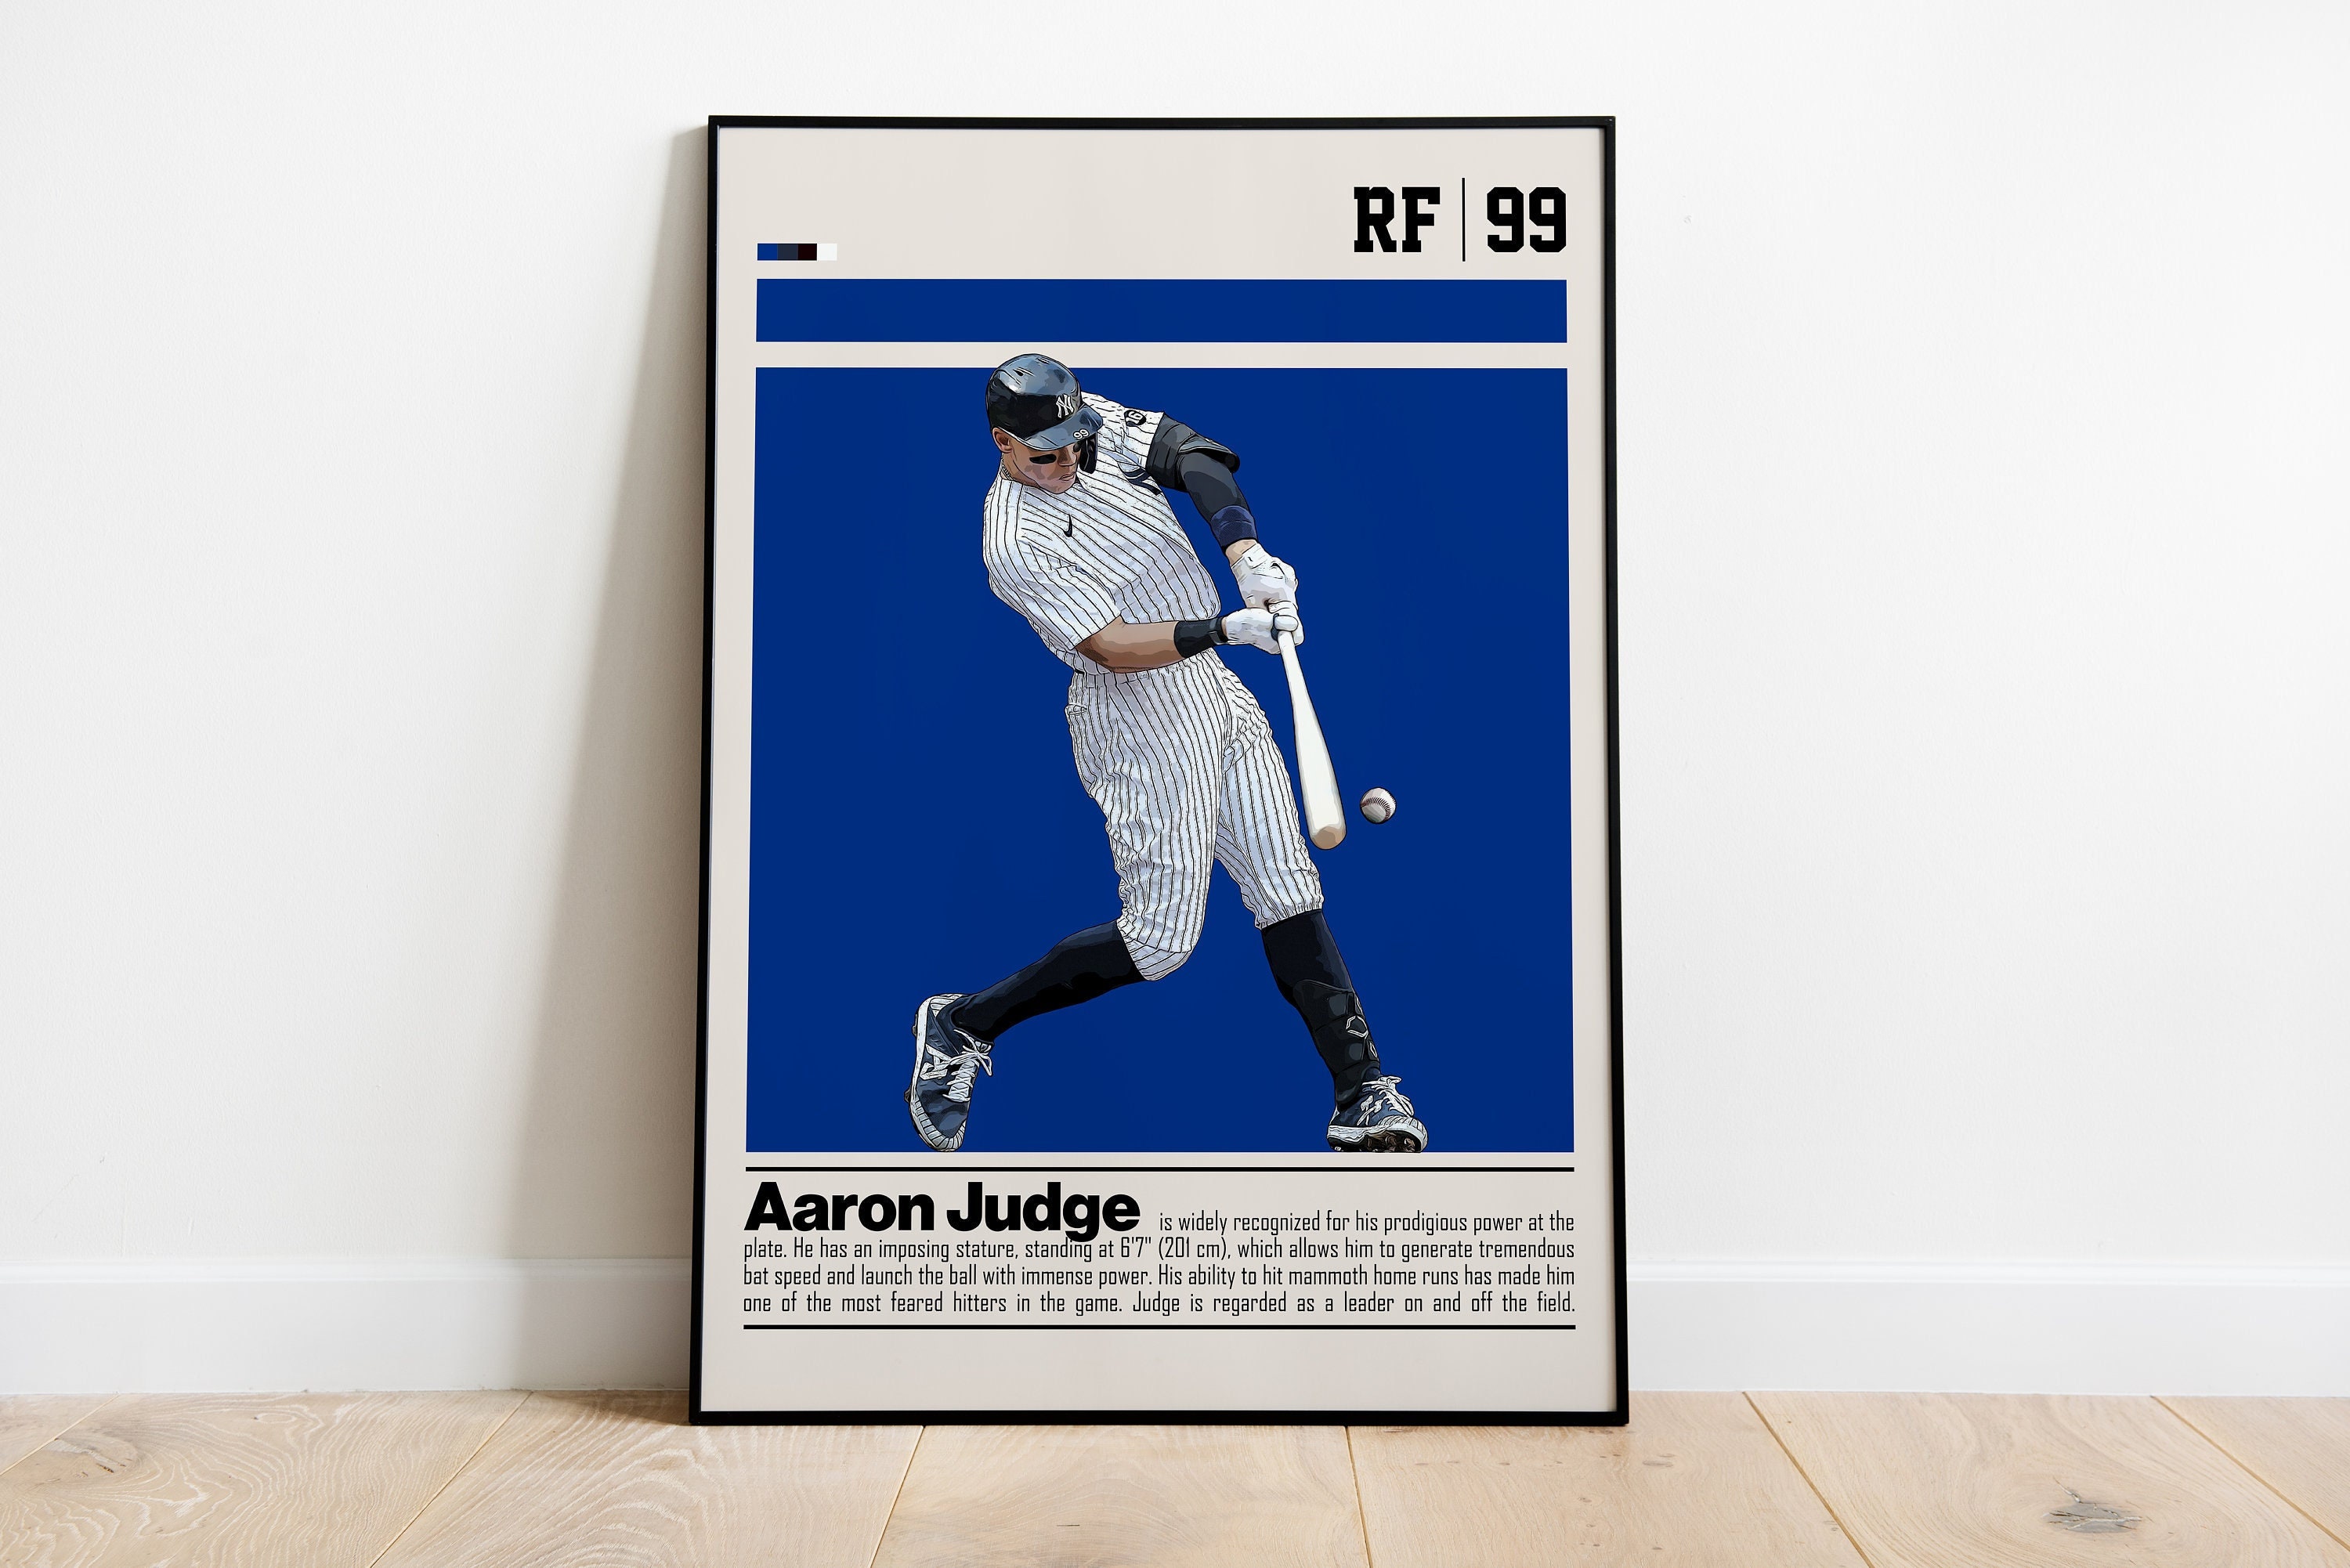 Aaron Judge Home Run Record 62 New York Yankees MLB Commemorative Wall  Poster - Costacos 2022